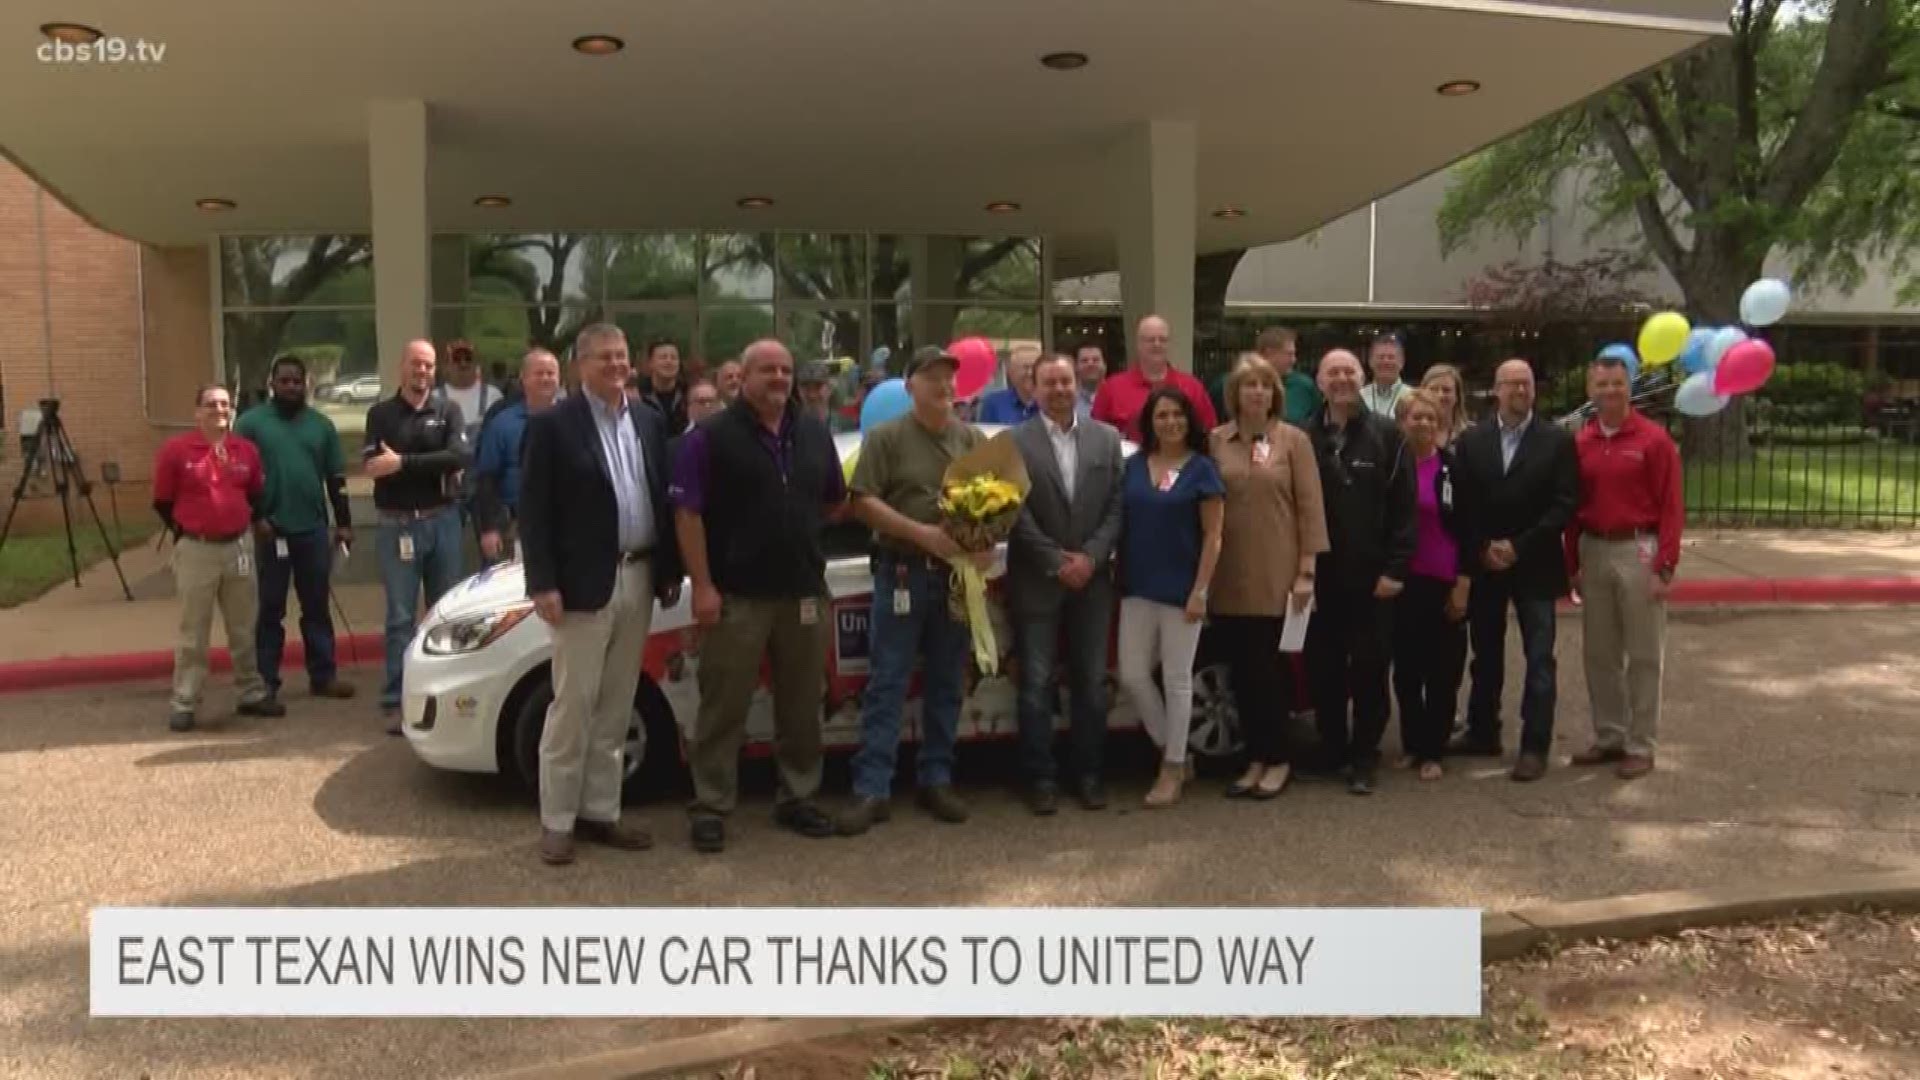 One lucky East Texan won a car, thanks to United Way!